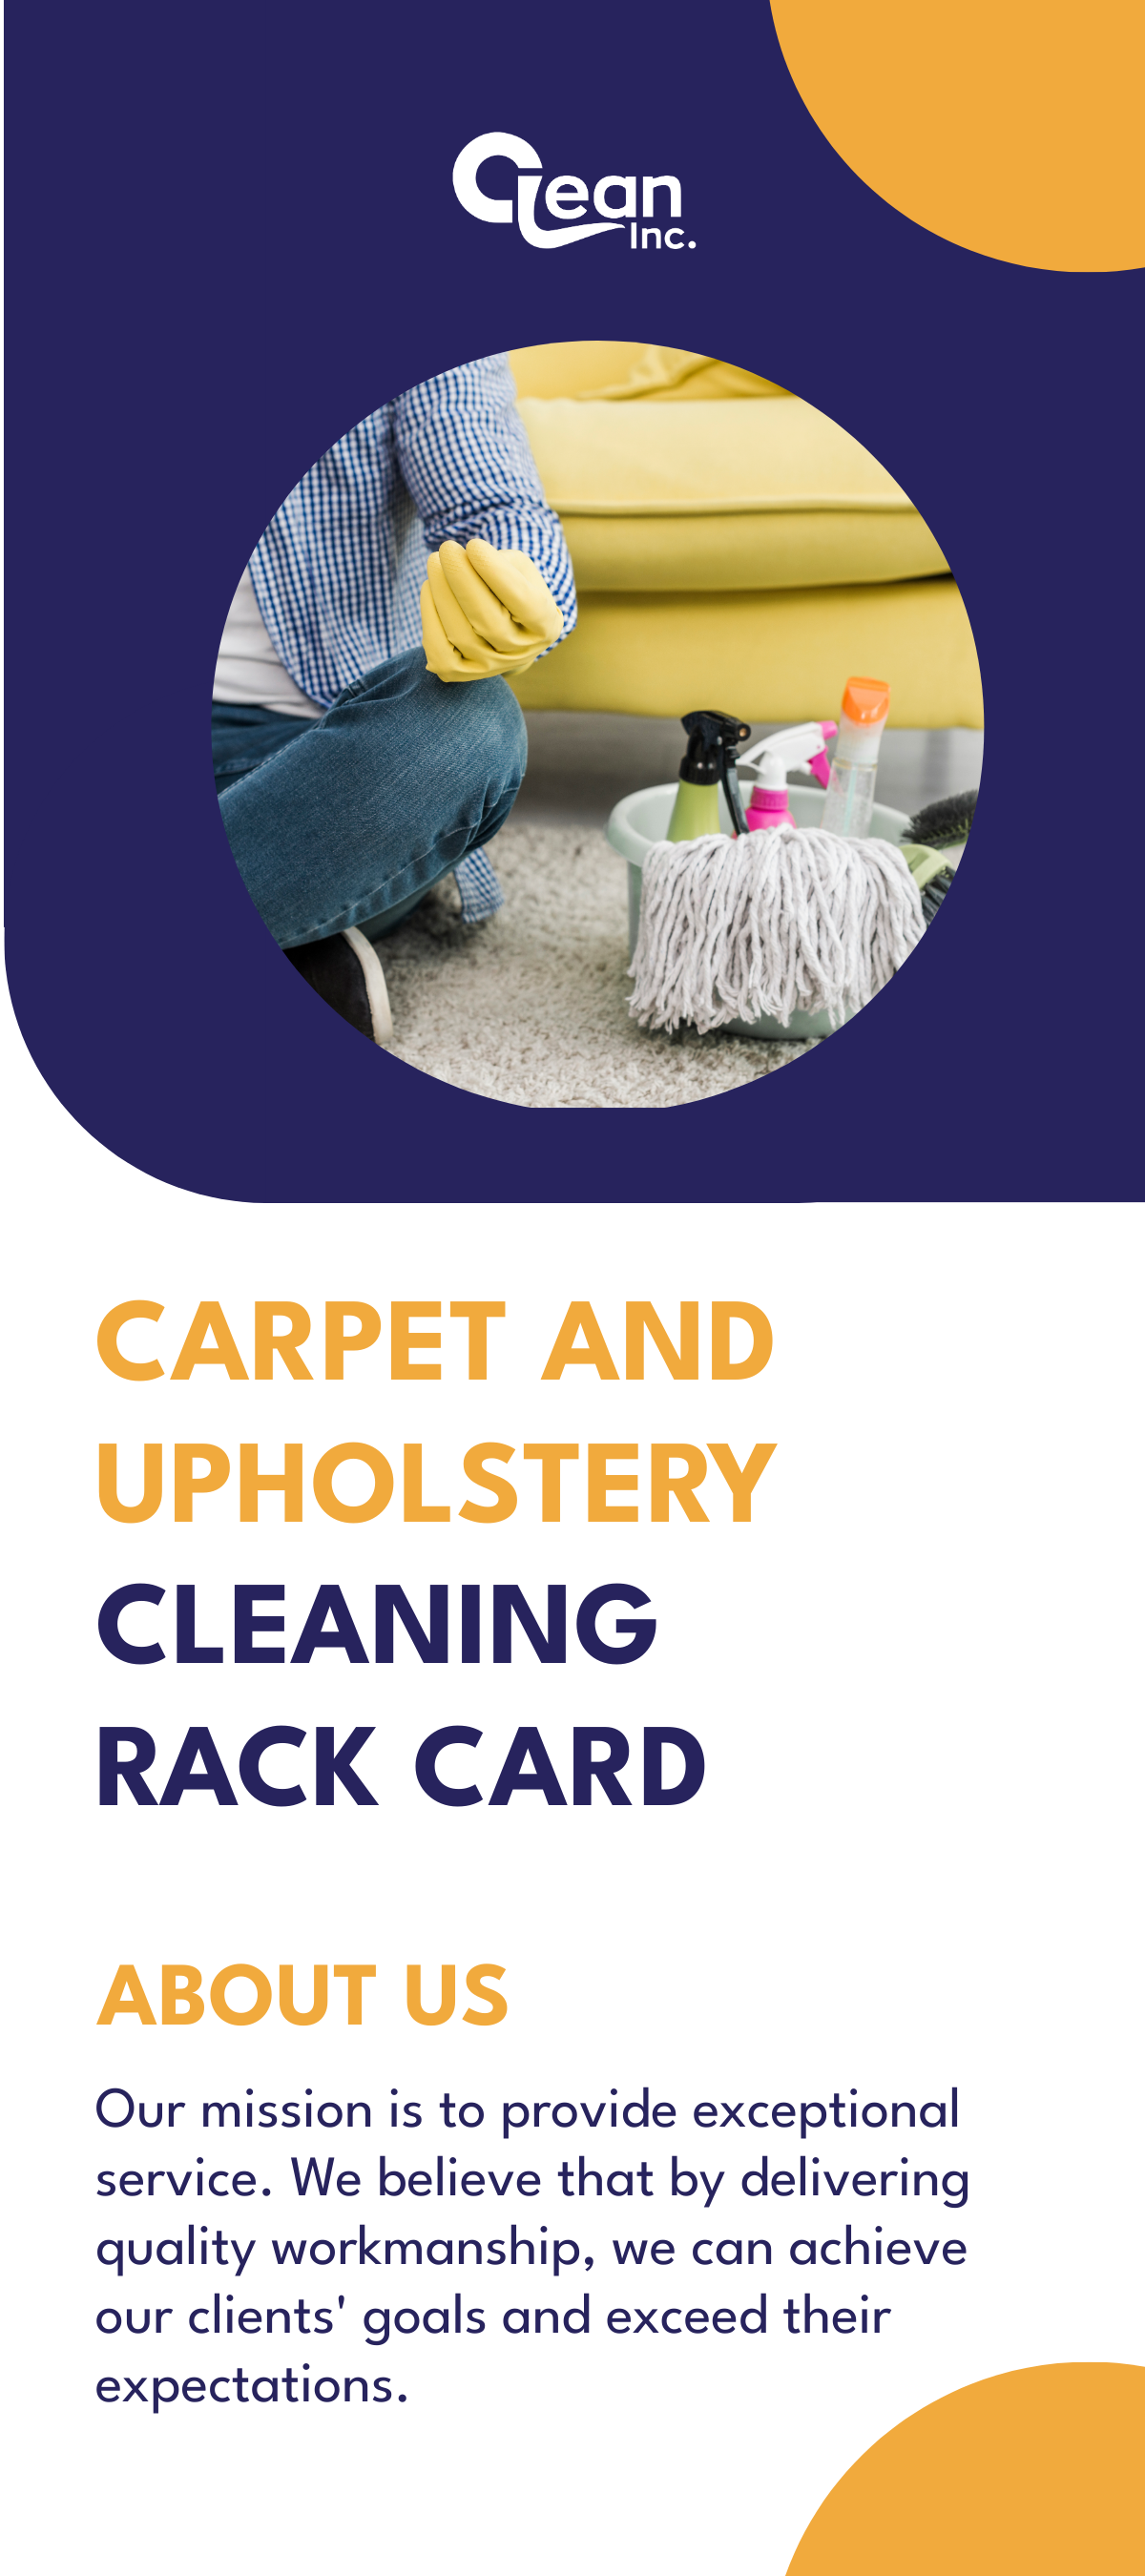 Carpet and Upholstery Cleaning Rack Card